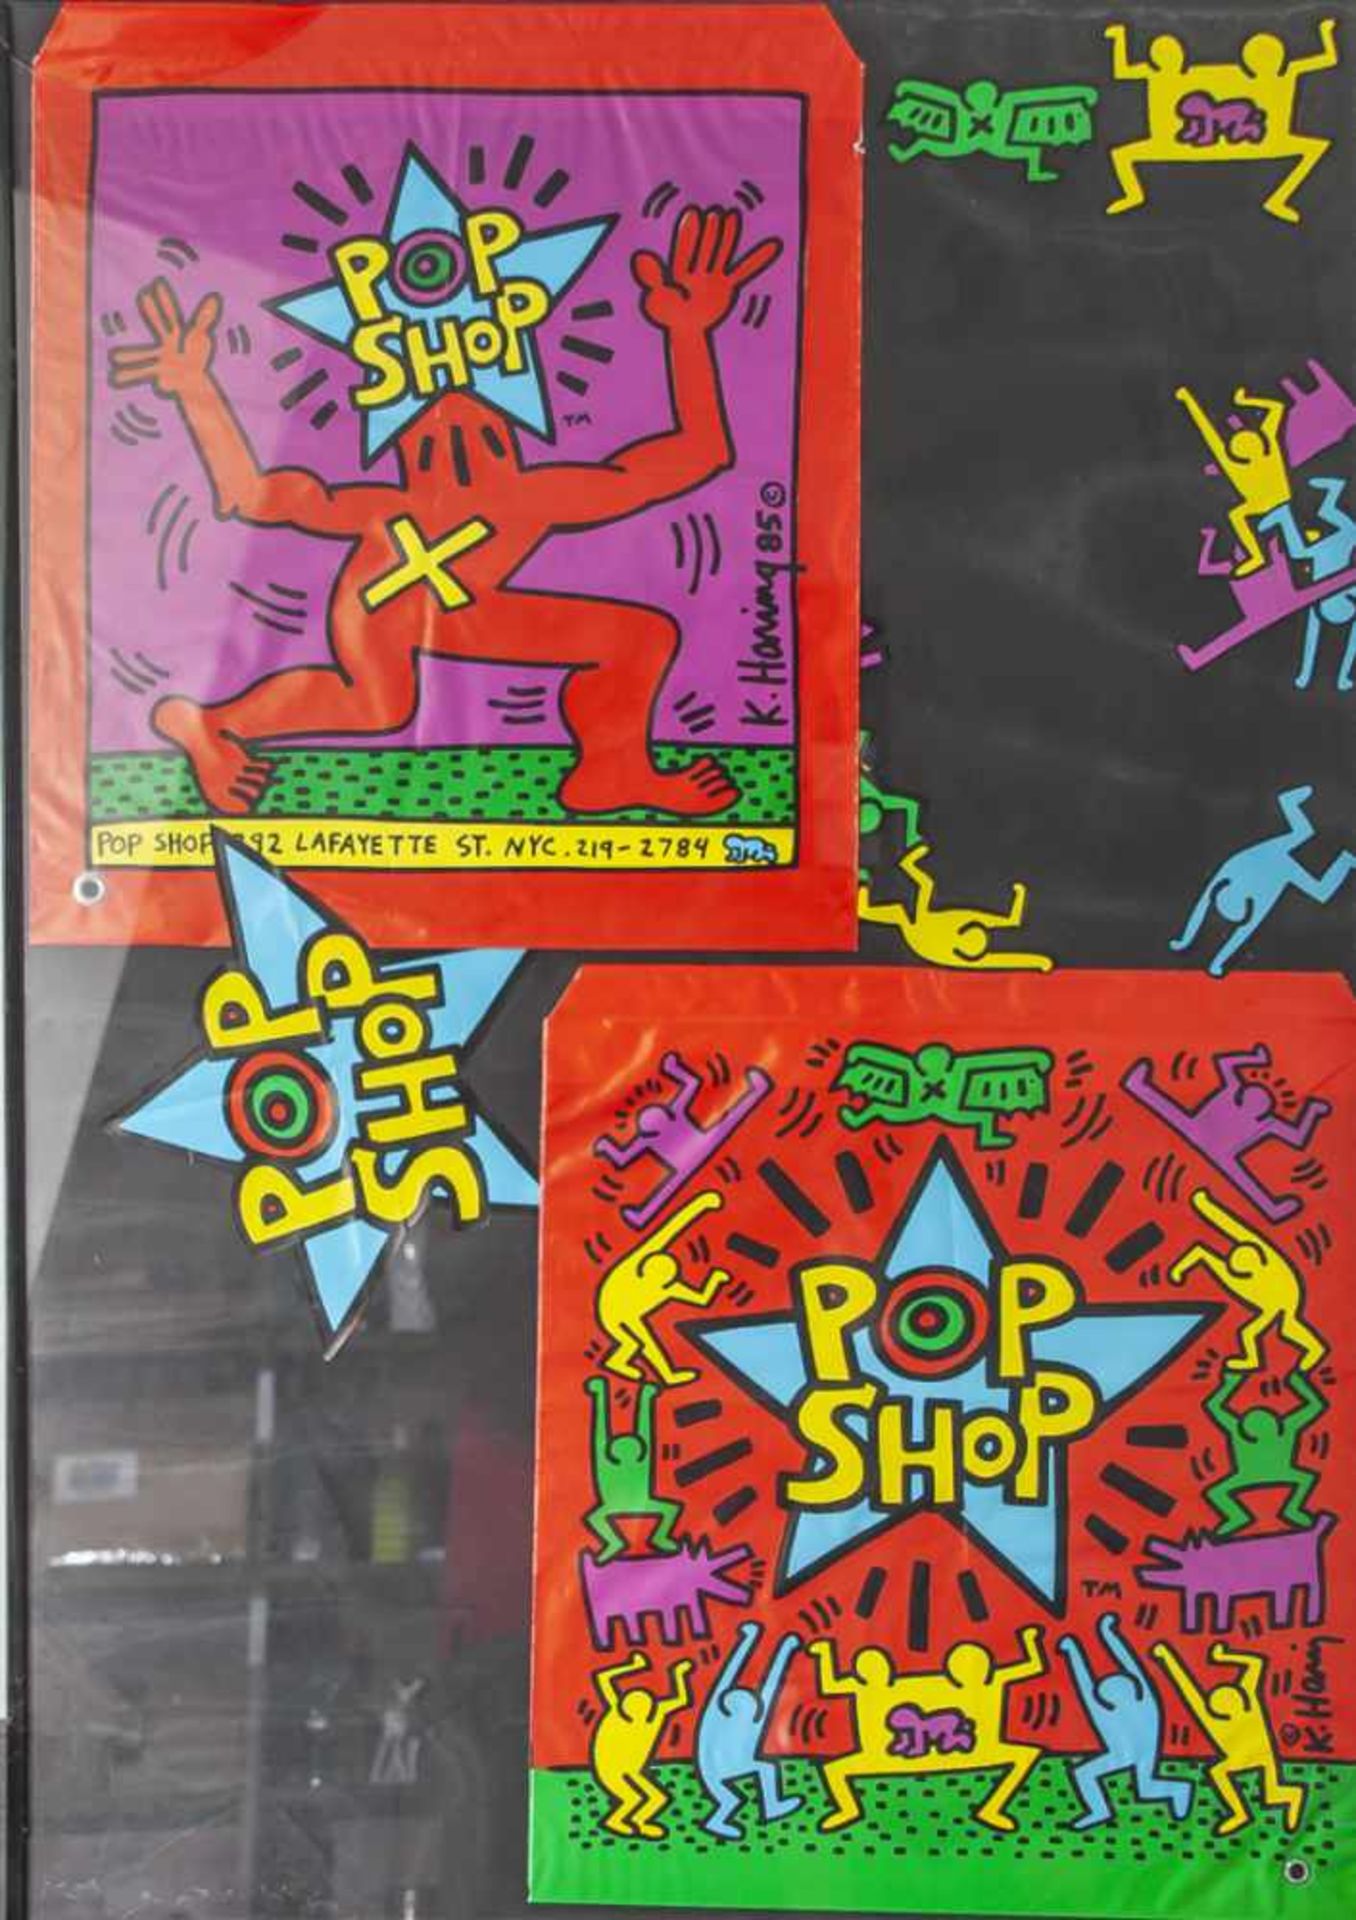 Haring, Keith (1958-1990), 2 x Pop Shop Shopping bag, 292 Lafayette St. NYC. 219 2784, 1985,